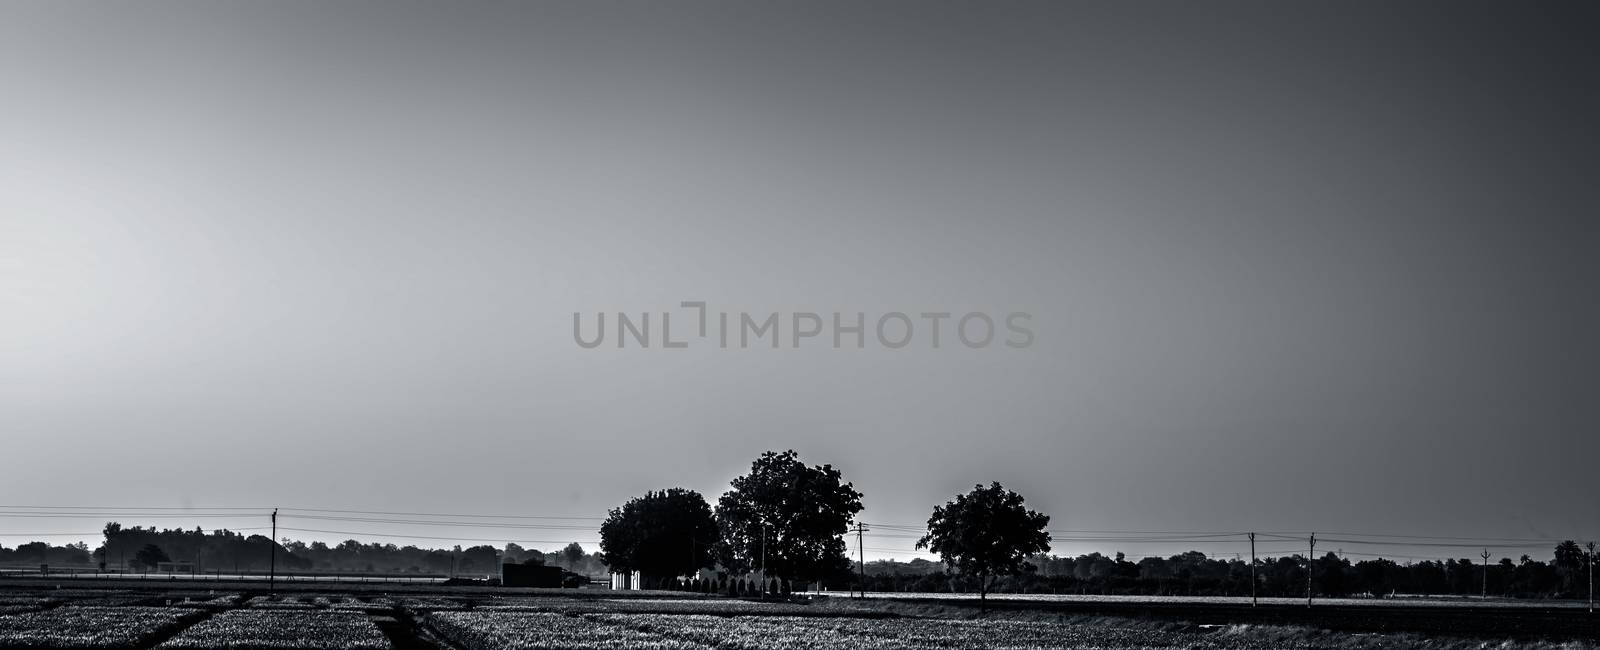 Empty fields wide angle landscape view of fields with some trees and vegetations. by mirzamlk